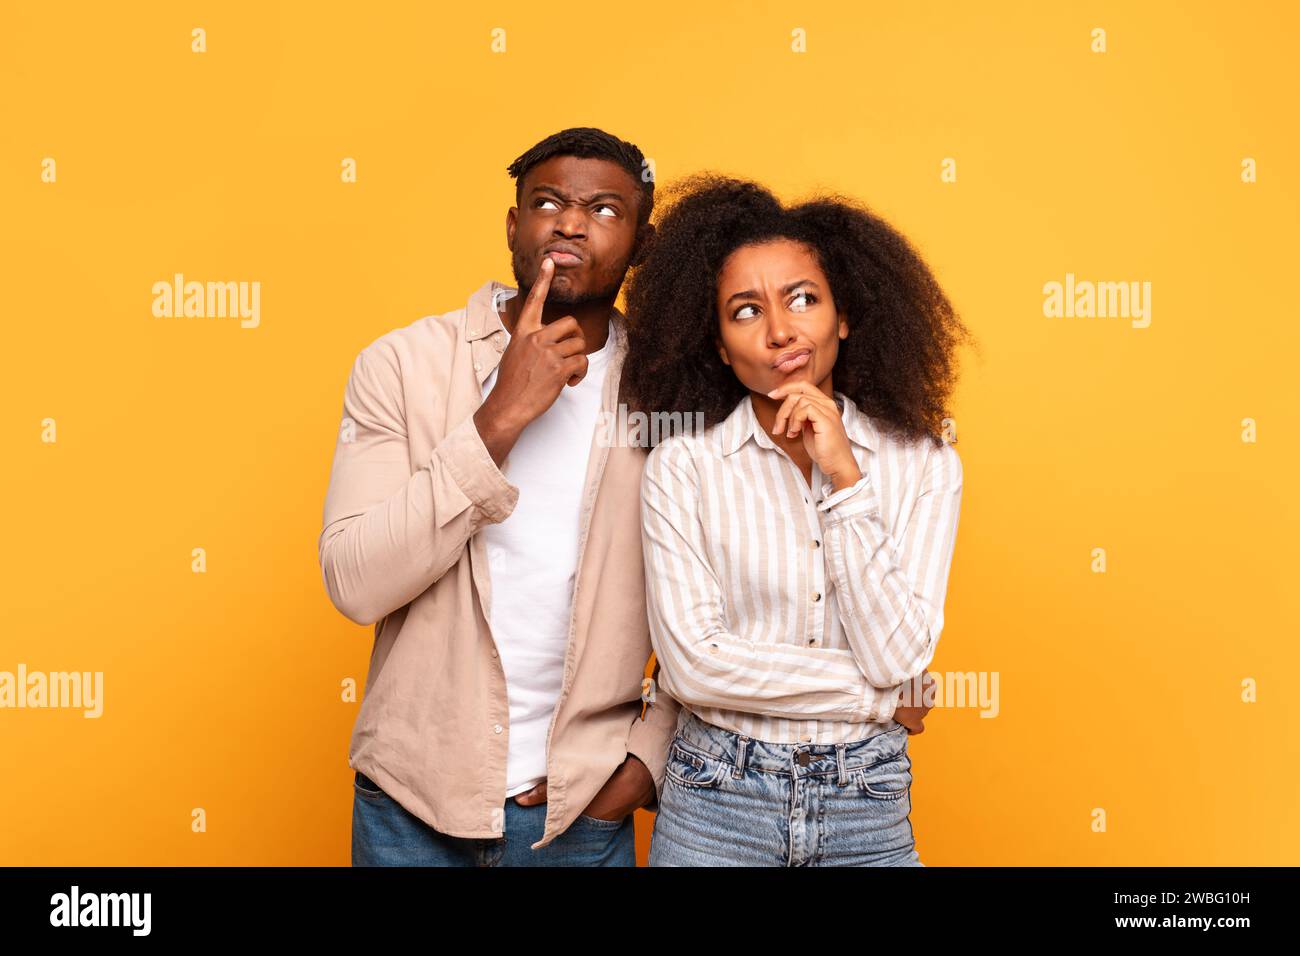 Thoughtful black couple with curious expressions on yellow Stock Photo